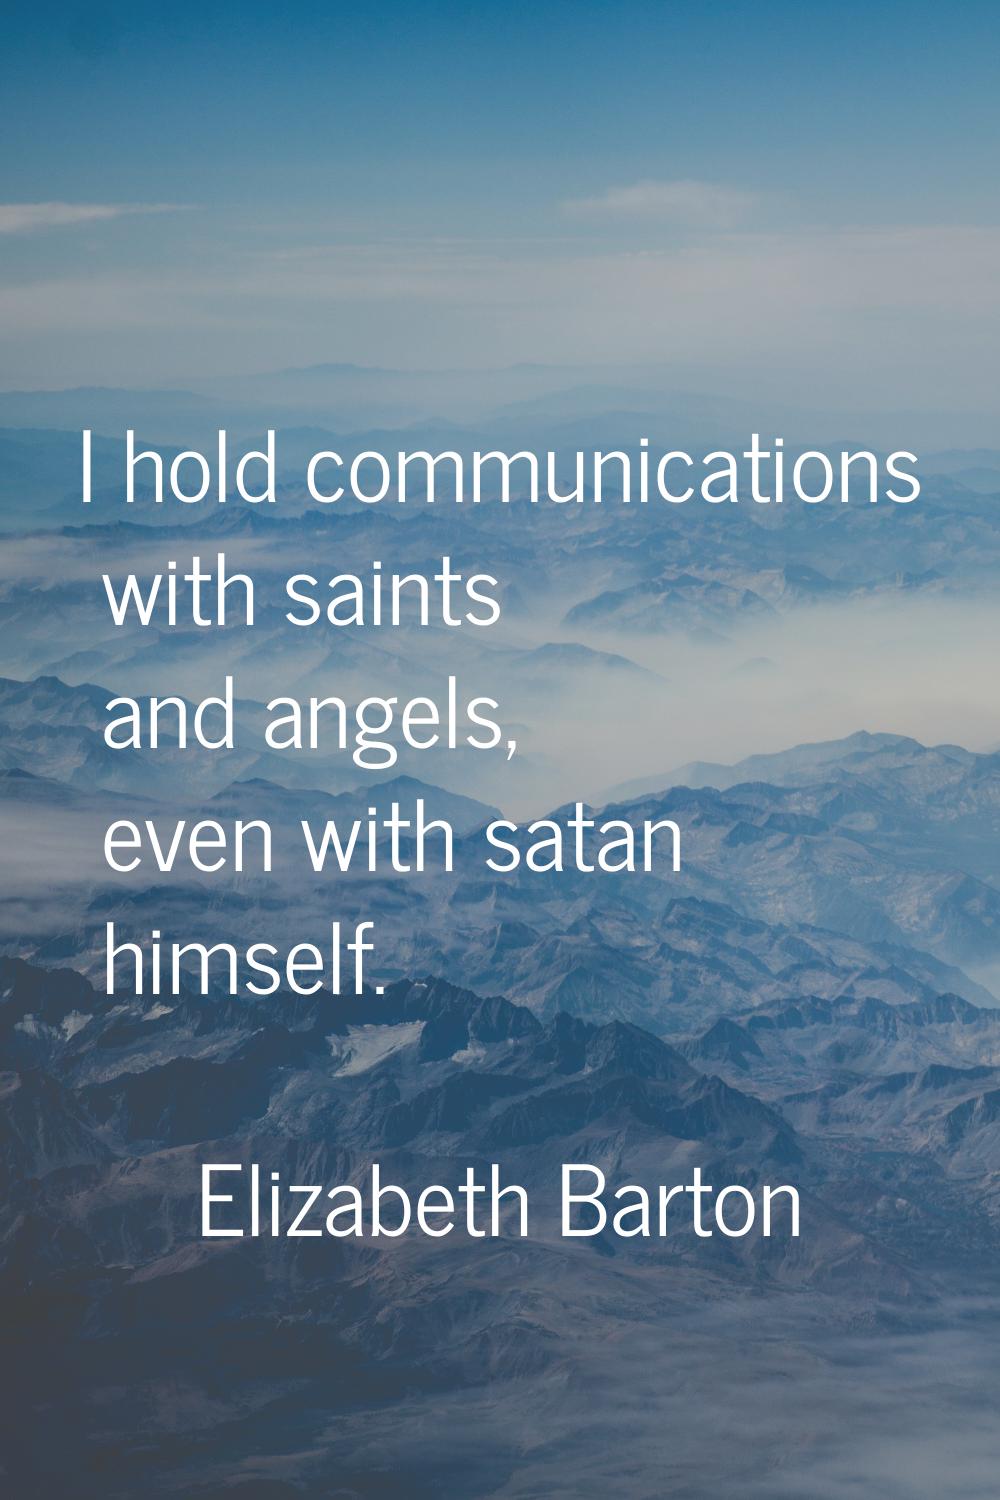 I hold communications with saints and angels, even with satan himself.